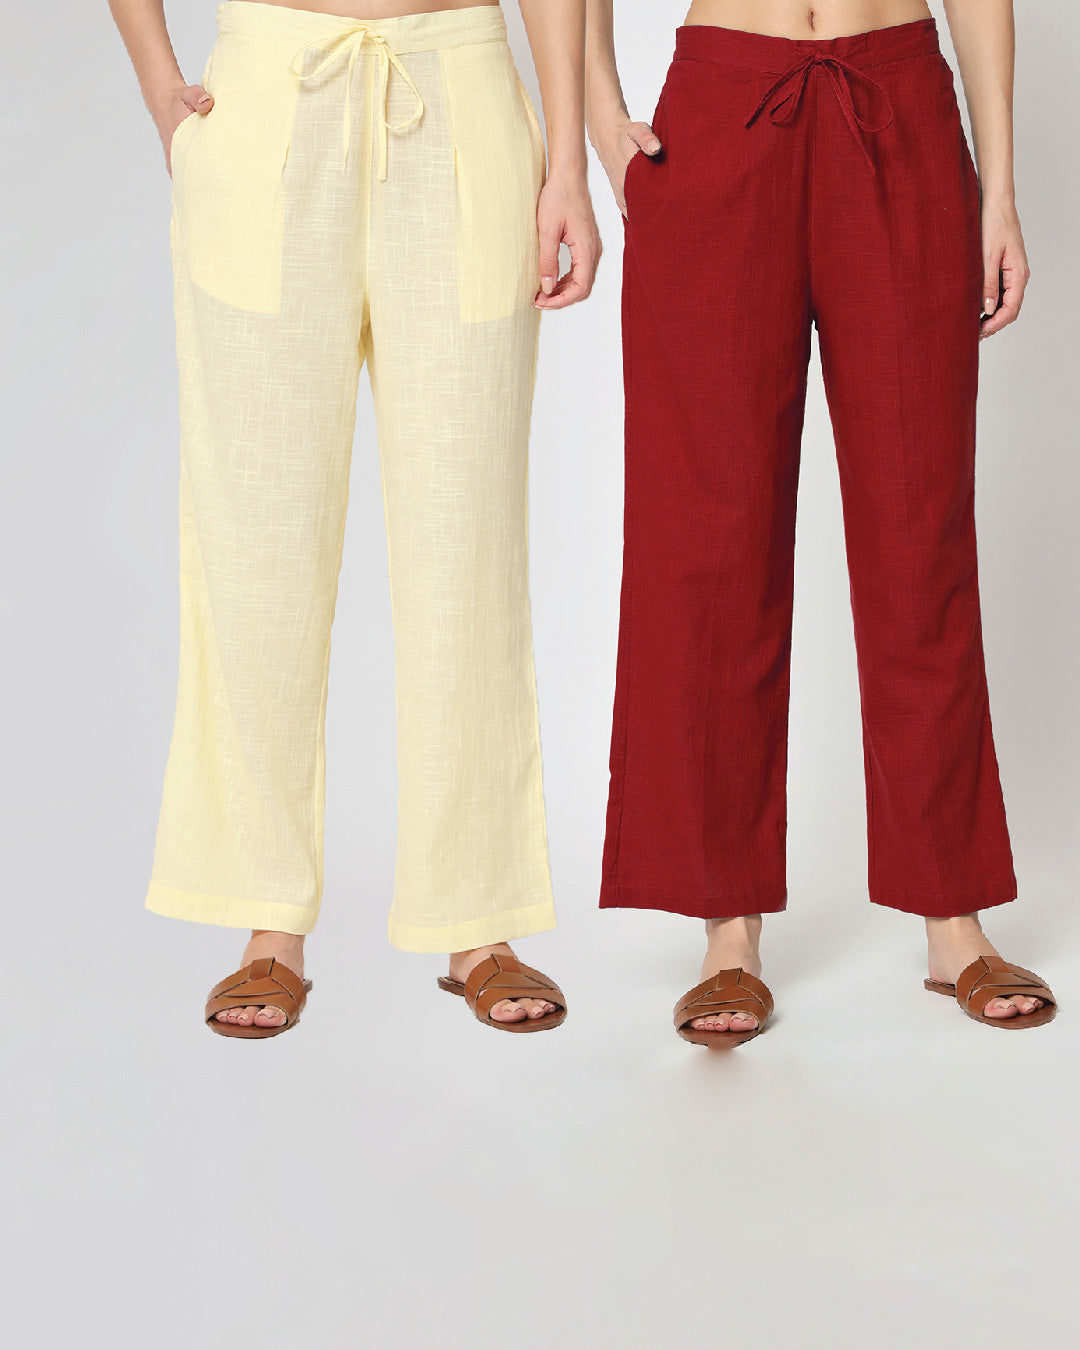 Combo: Airy Lemon & Classic Red Straight Pants- Set of 2